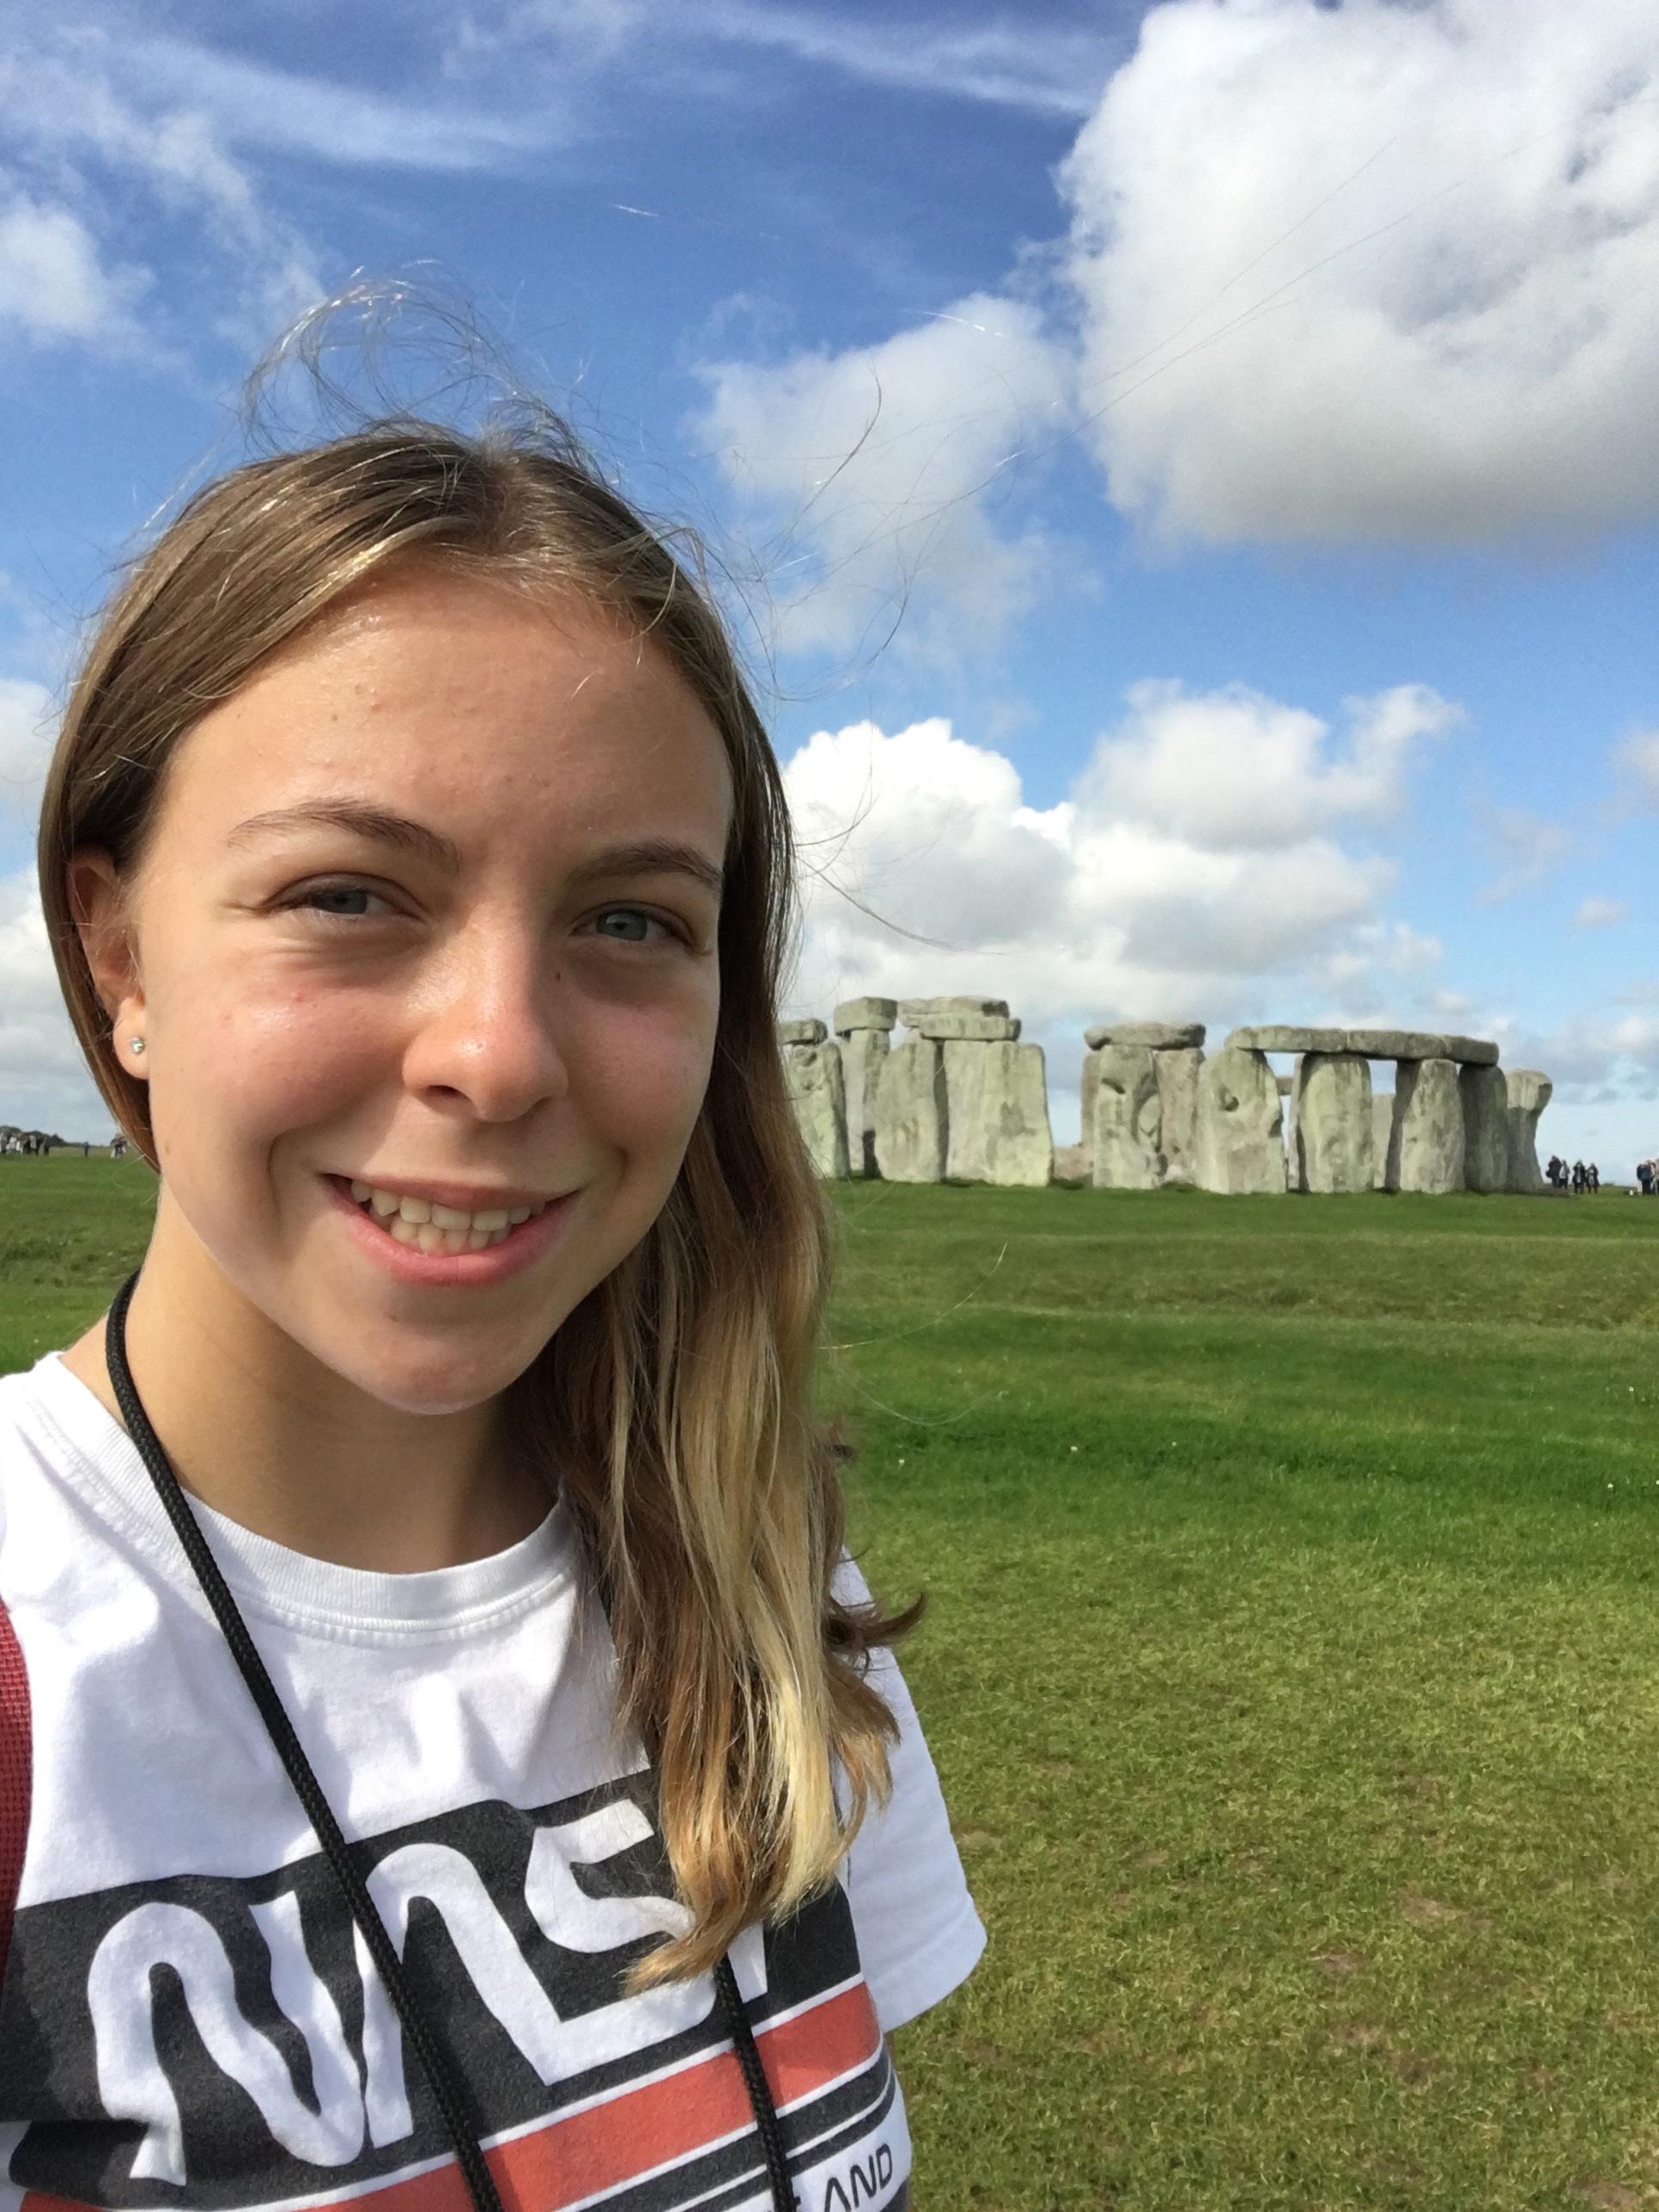 A head-and-shoulders photo of a person. Stonehenge appears in the background.